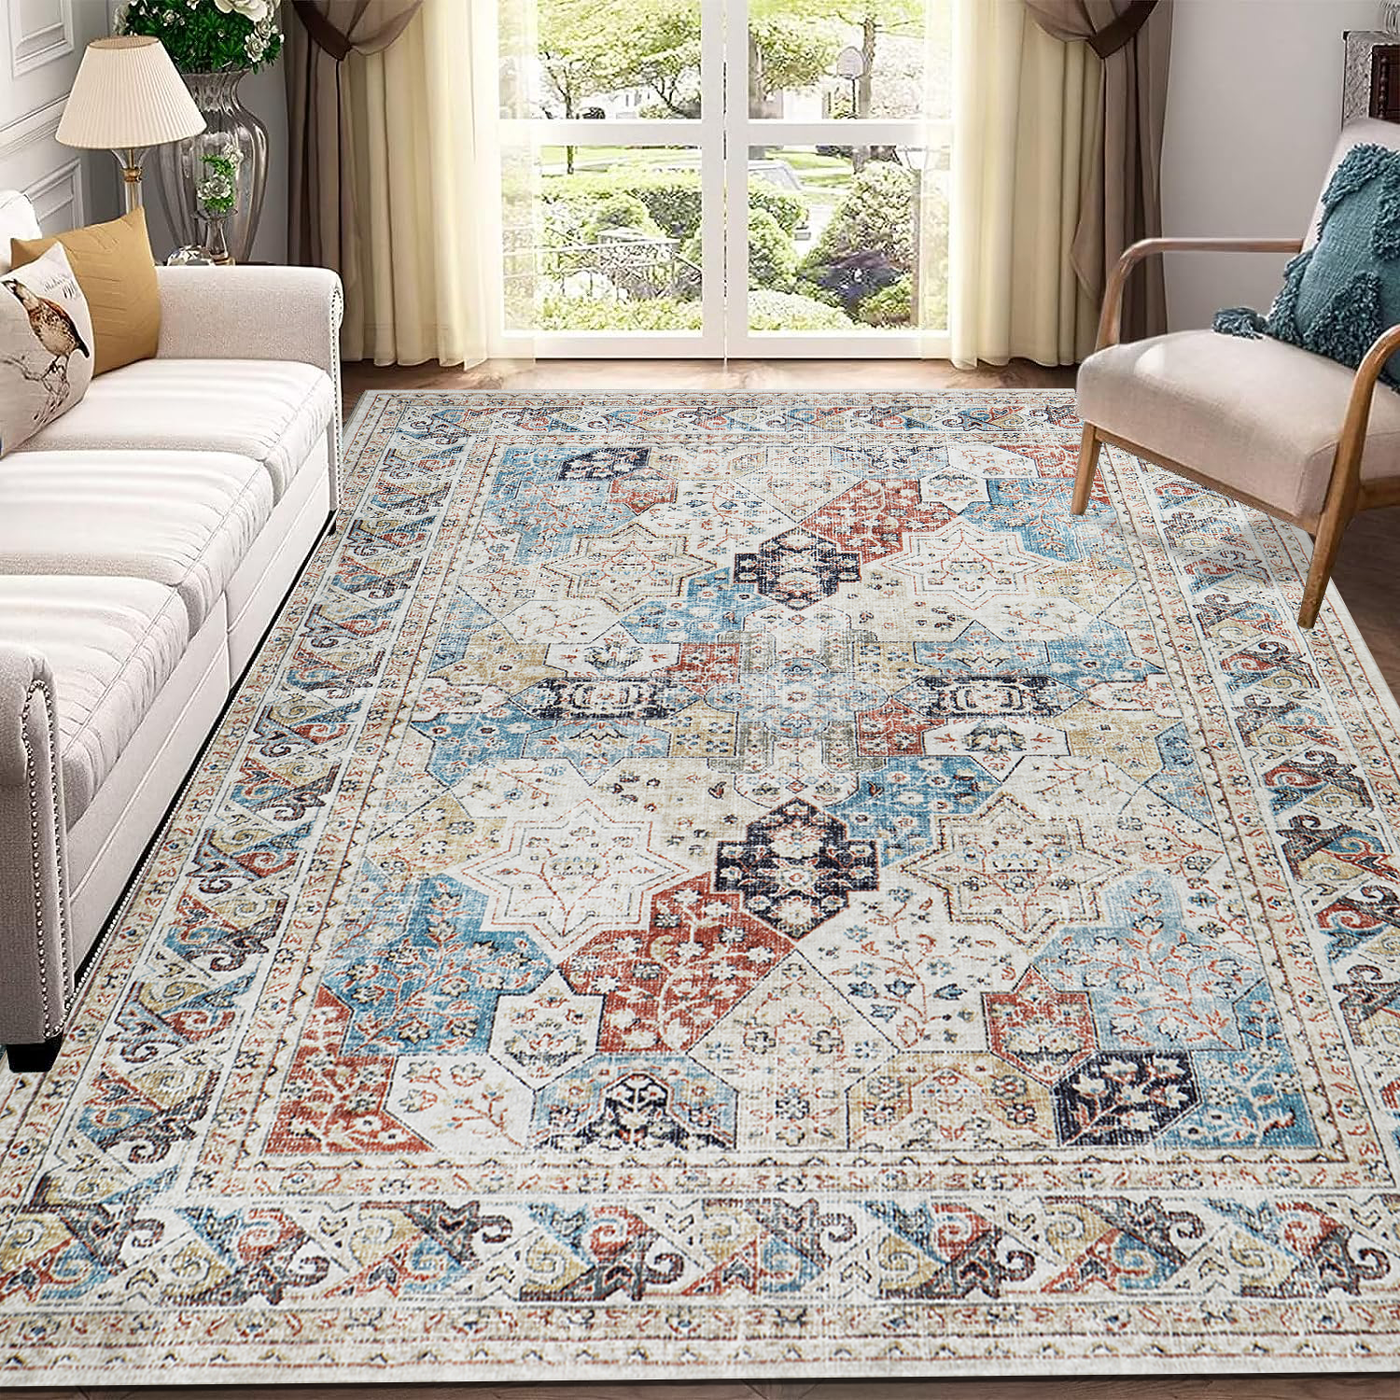 Persian Style Rug Cashmere Coastal Runner